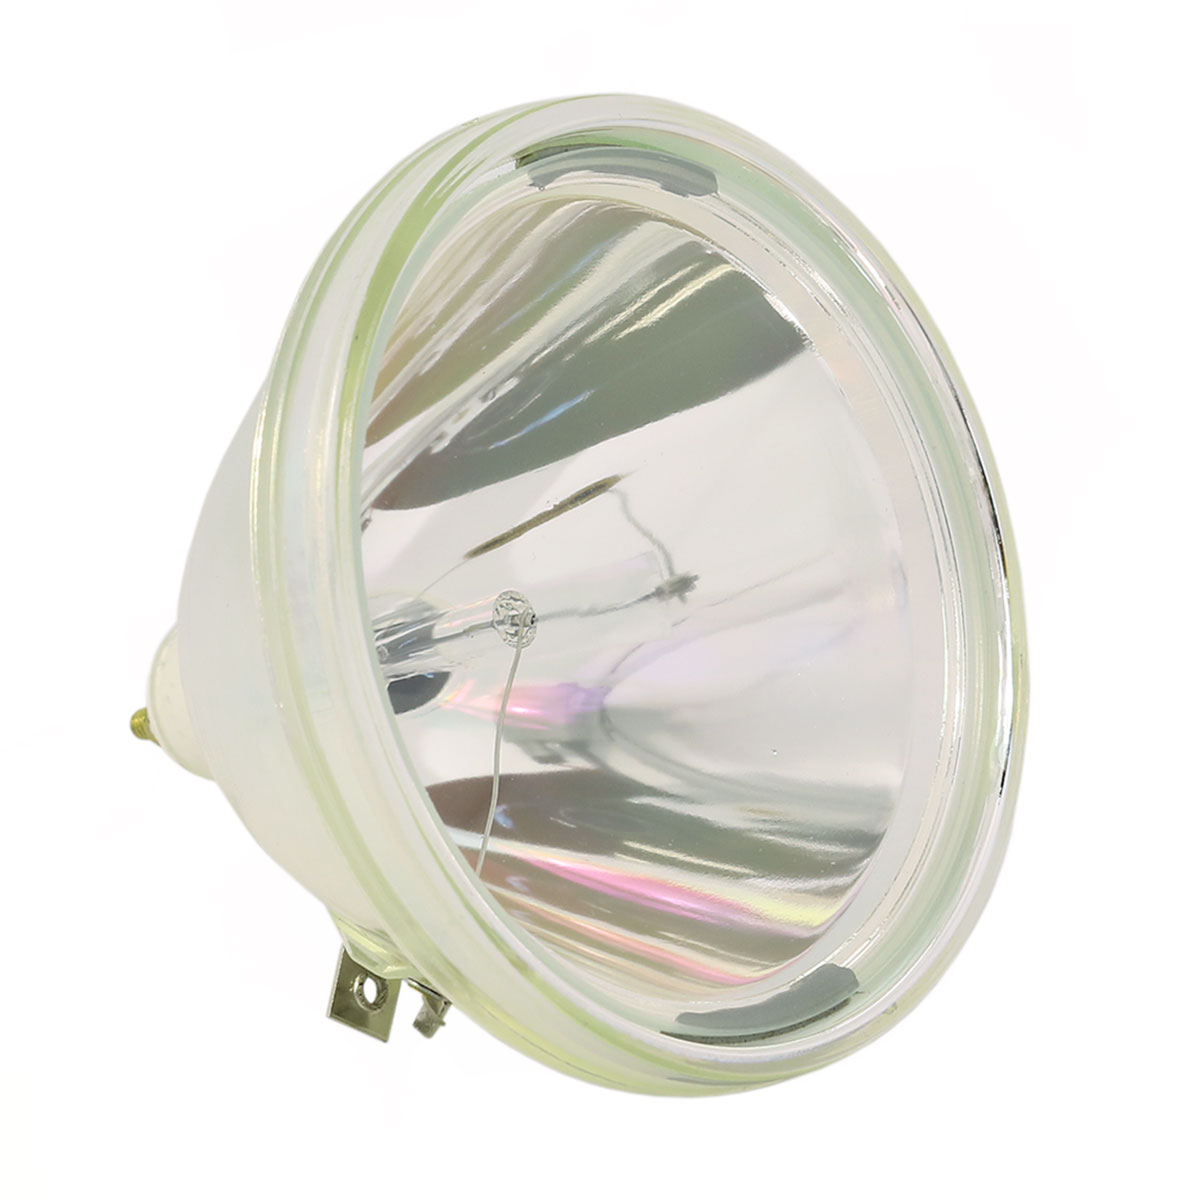 Lutema Economy Bulb for Philips Fellini 100 TV Lamp (Lamp Only) - image 2 of 6